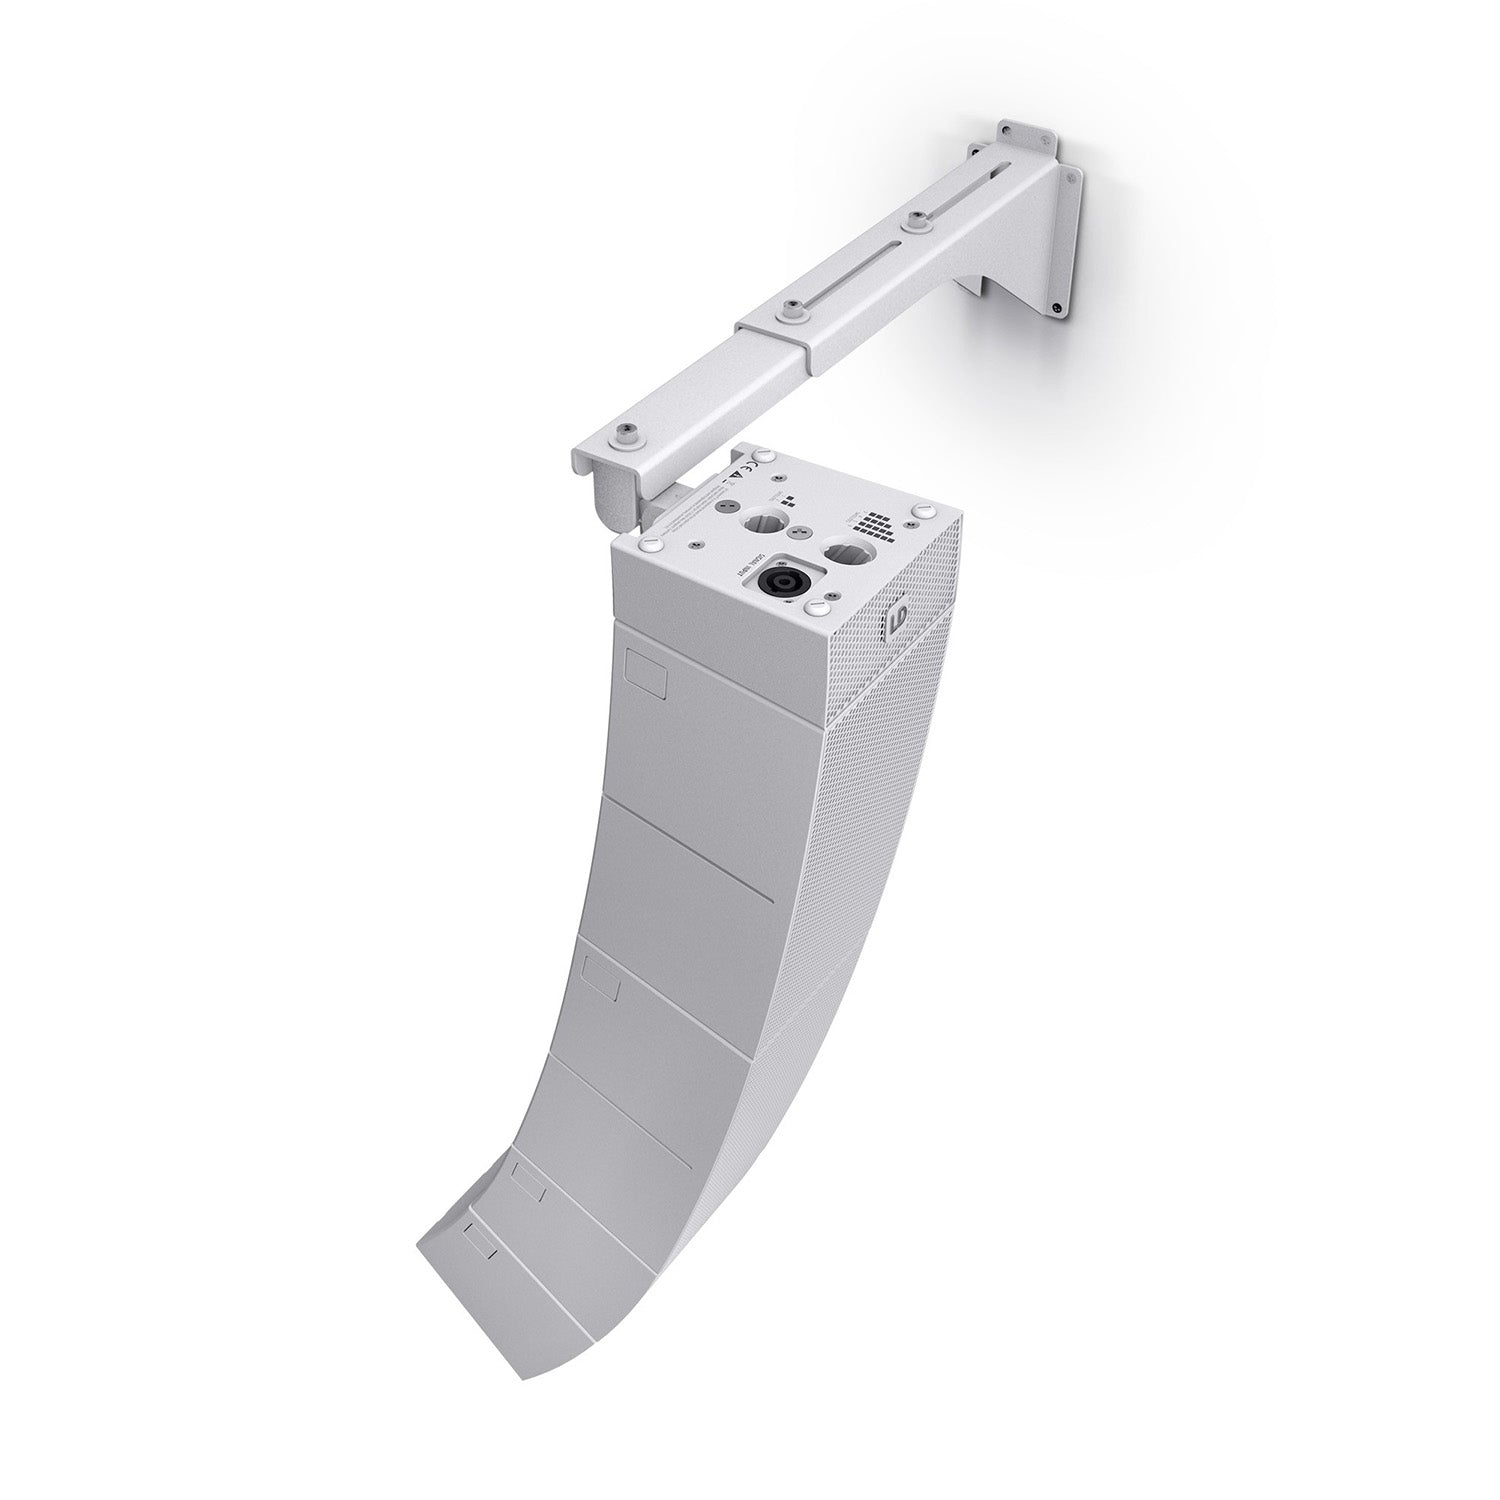 LD Systems CURV 500 WM BL W, Curv 500 Tilt and Swivel Wall Mount Bracket for Up to 6 Satellites - White - Hollywood DJ